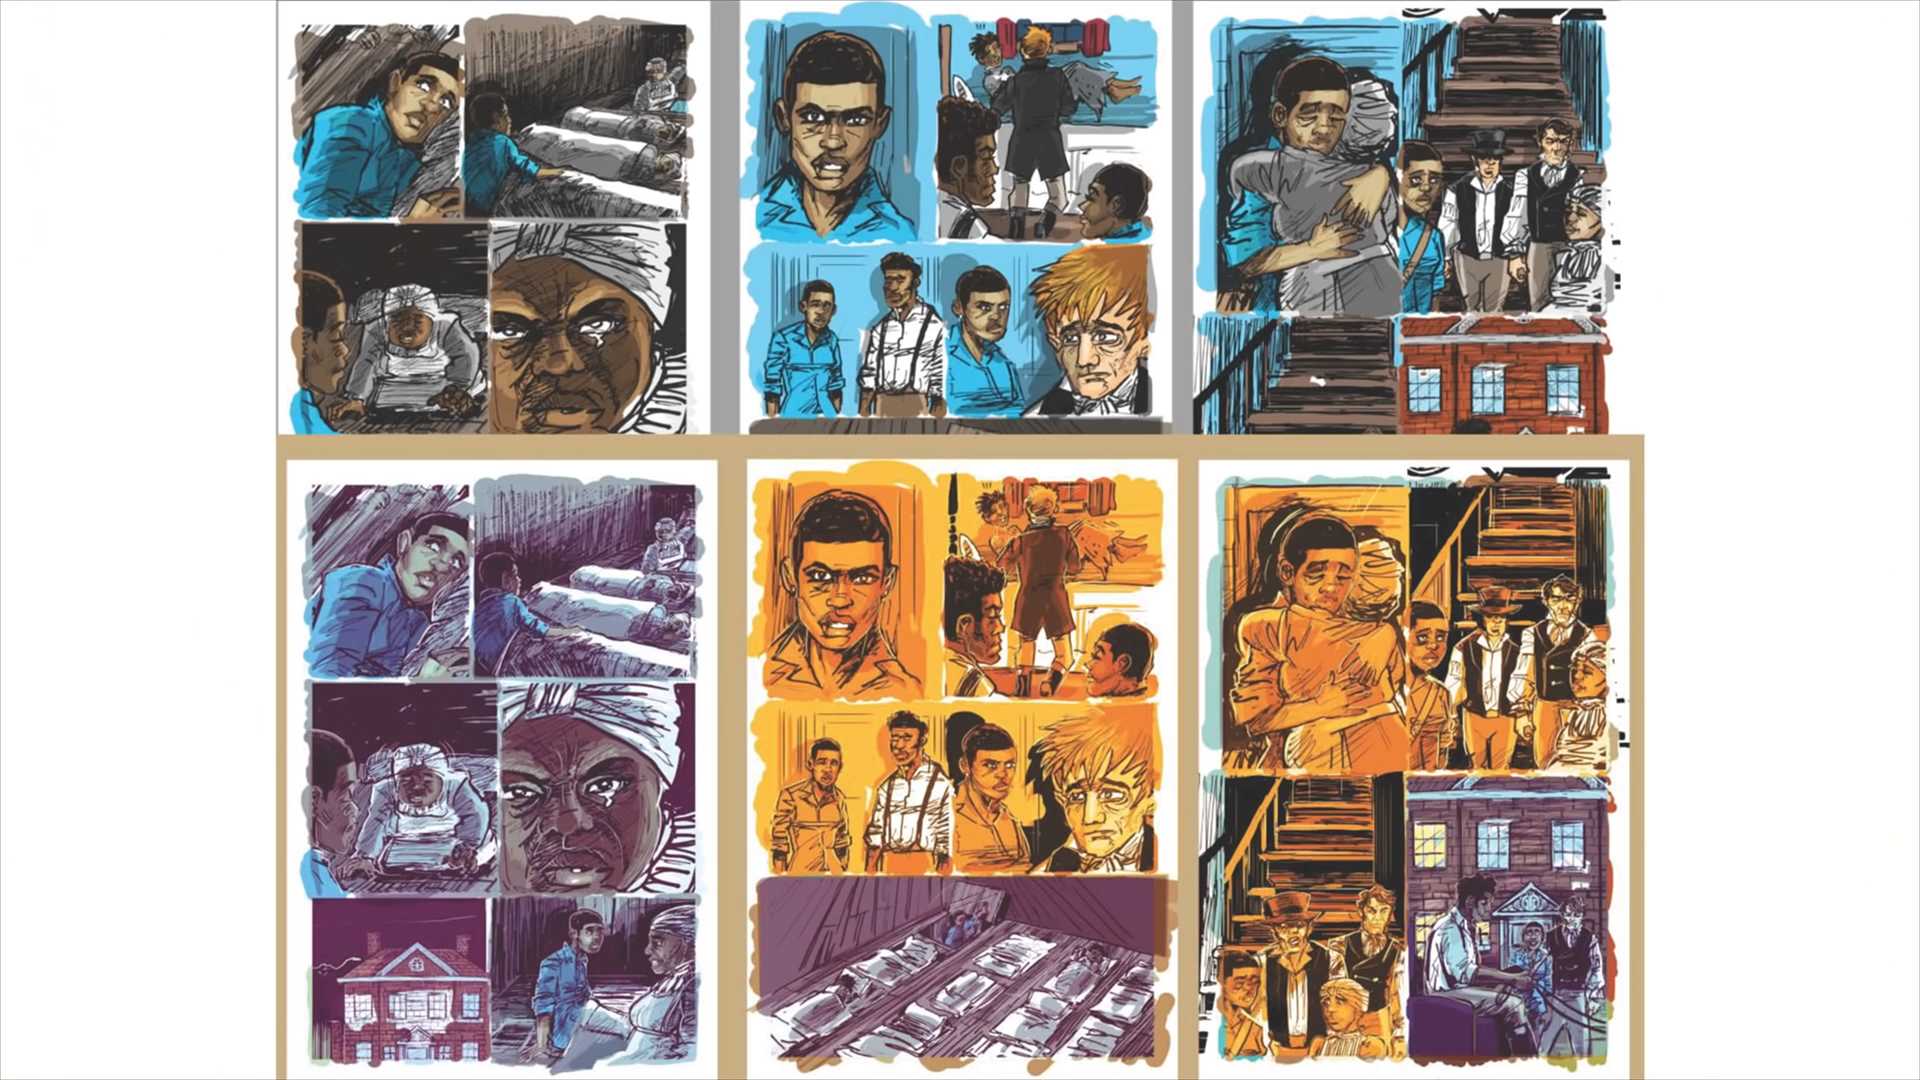 6 draft of pages from the graphic novel in different colors, like blue, orange, and purple